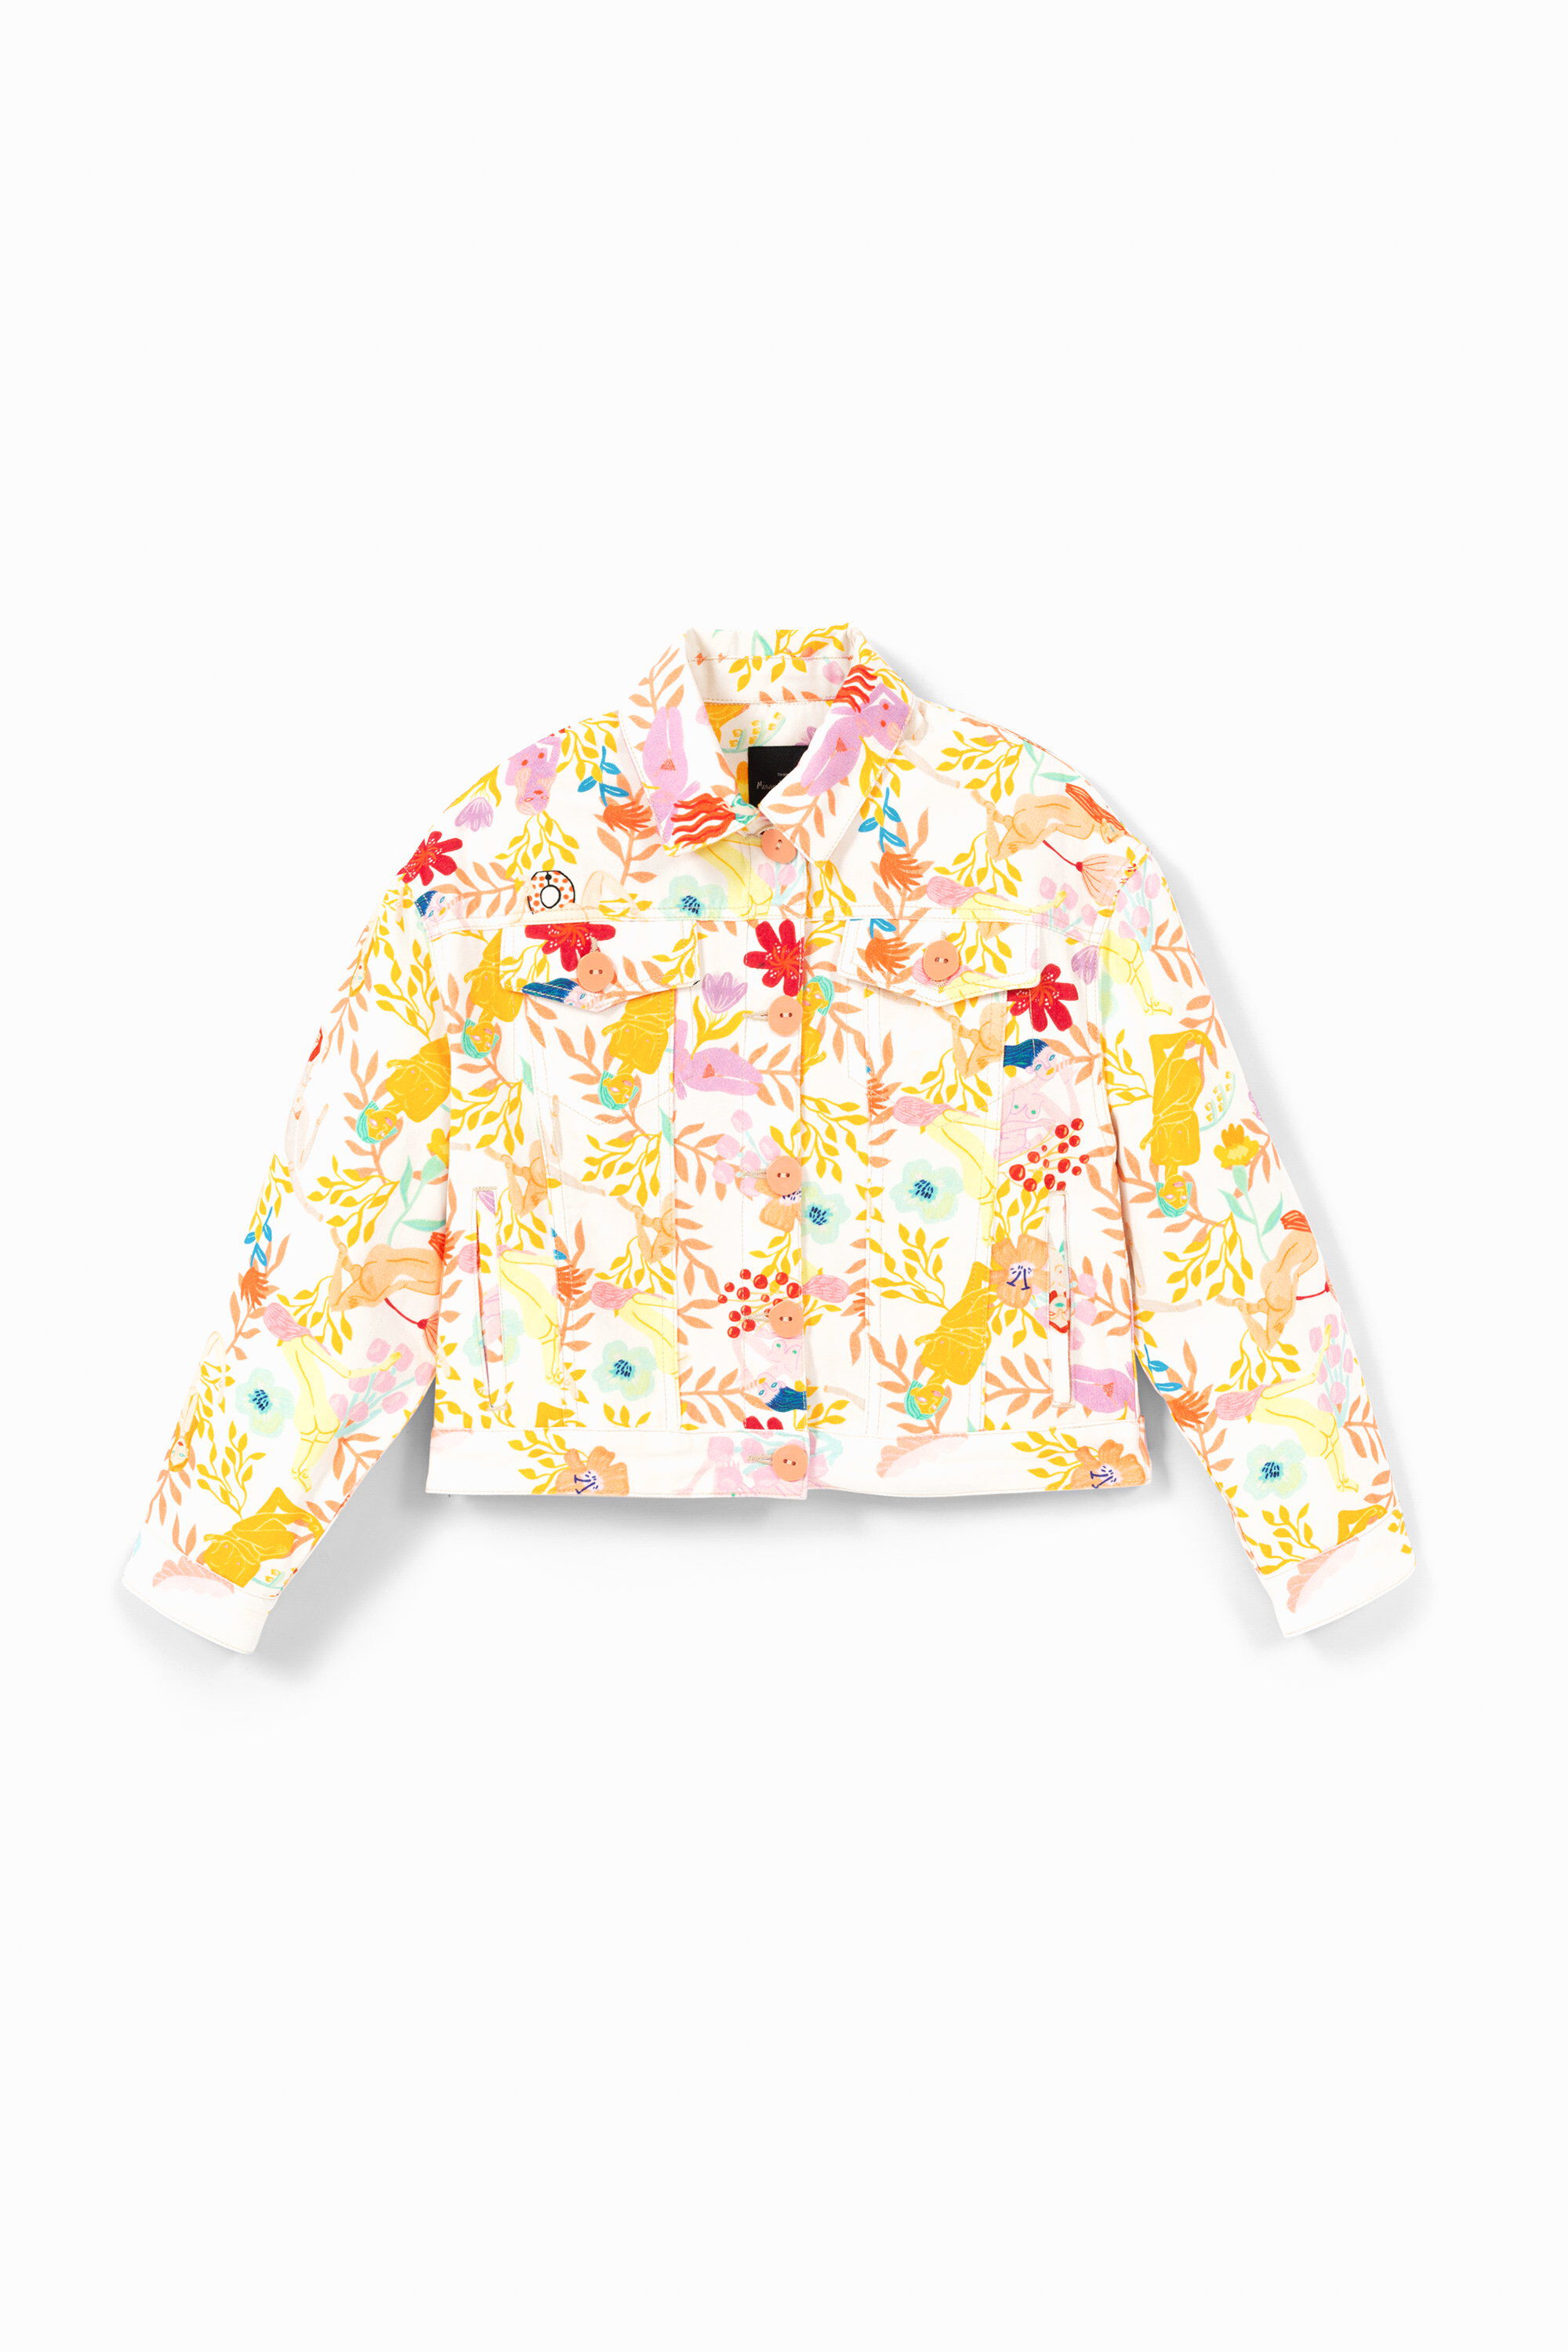 Desigual Illustrated Jacket In Material Finishes